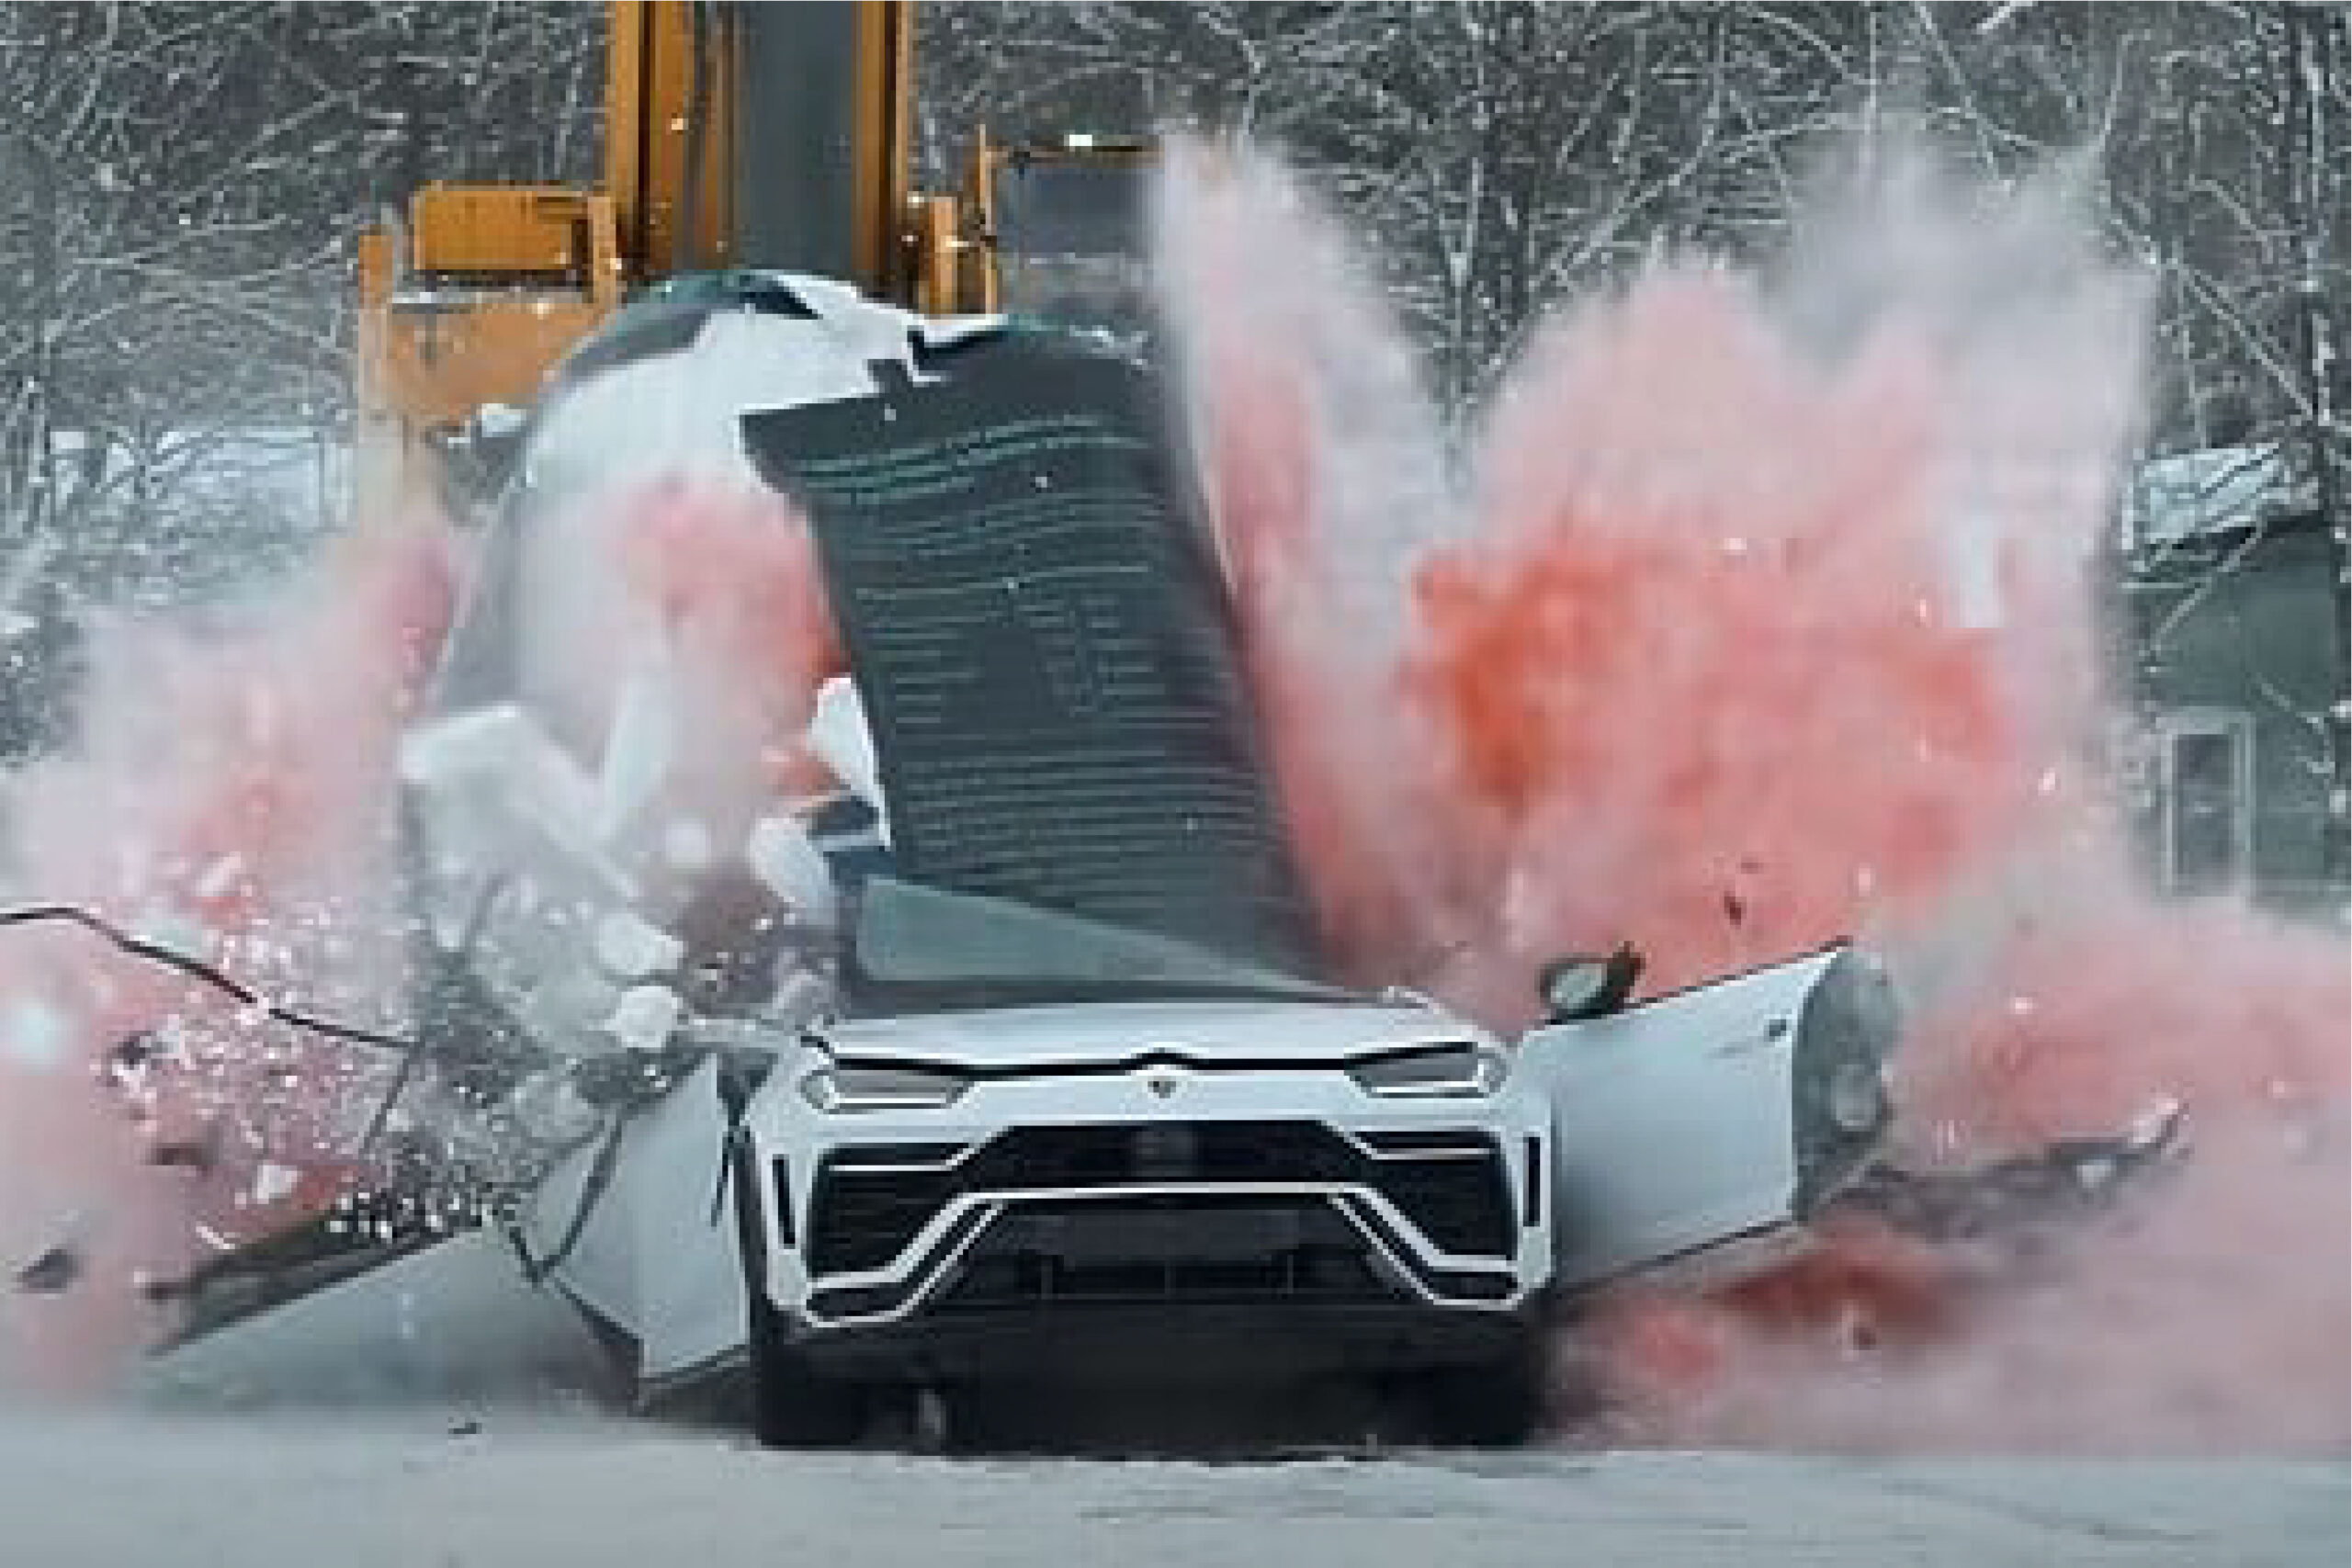 https://brochureshub.com/wp-content/uploads/2023/03/Destroyed-a-Lamborghini-Urus-to-promote-an-energy-drink-scaled.jpg